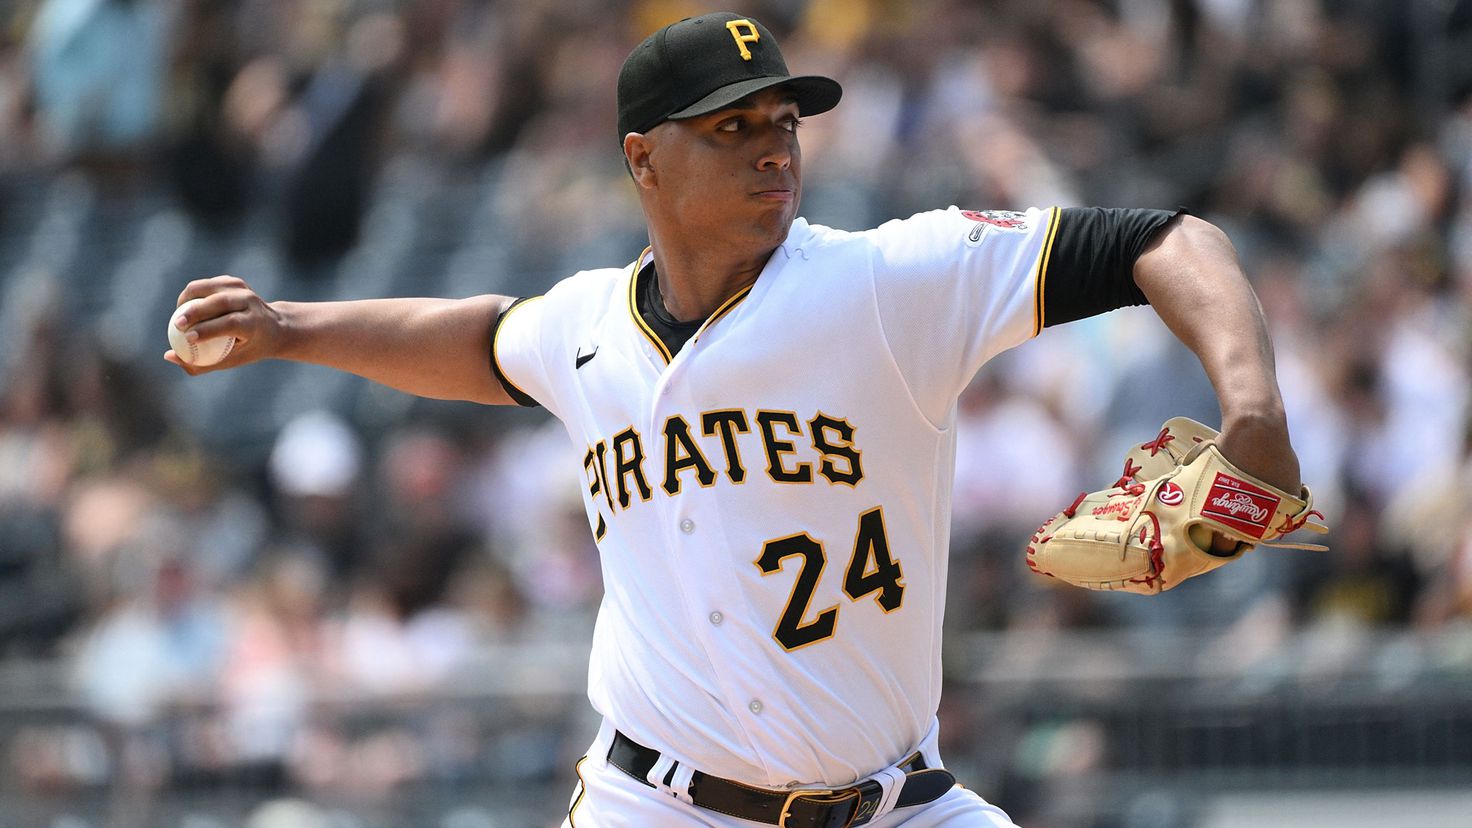 Cuban pitcher Johan Oviedo of the Pirates enters MLB history with an immaculate inning
